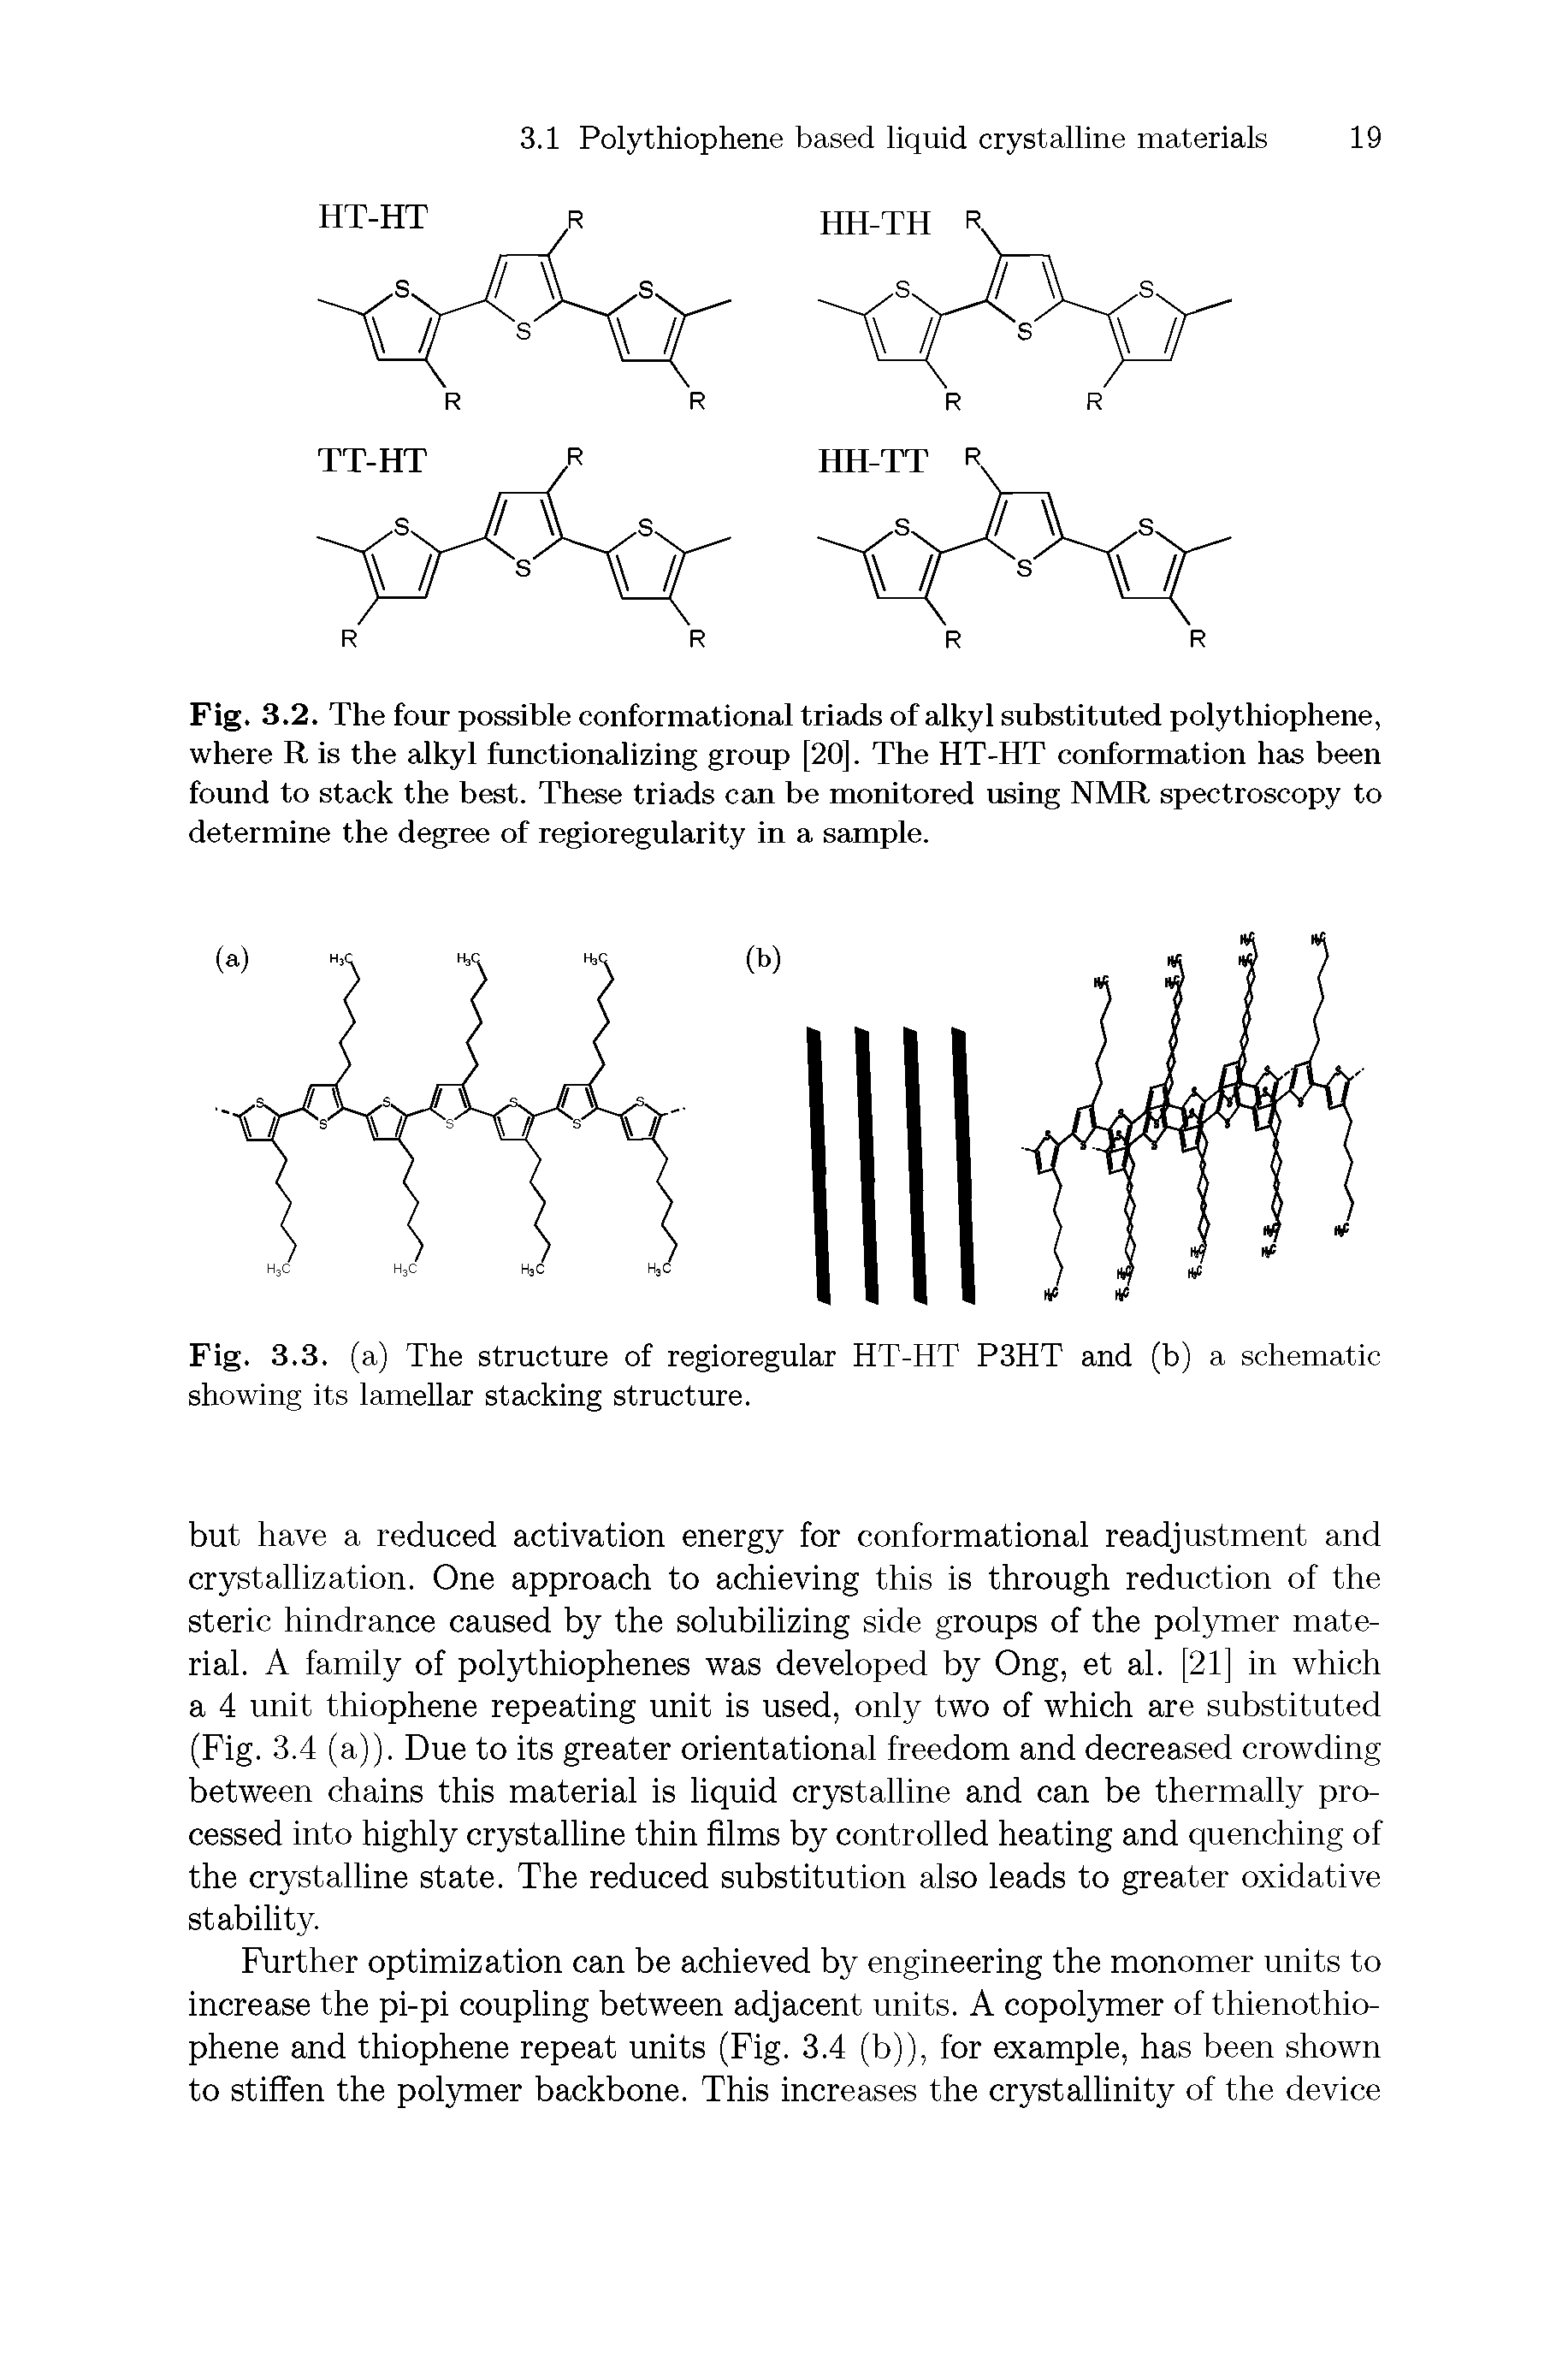 Fig. 3.2. The four possible conformational triads of alkyl substituted polythiophene, where R is the alkyl functionalizing group [20]. The HT-HT conformation has been found to stack the best. These triads can be monitored using NMR spectroscopy to determine the degree of regioregularity in a sample.